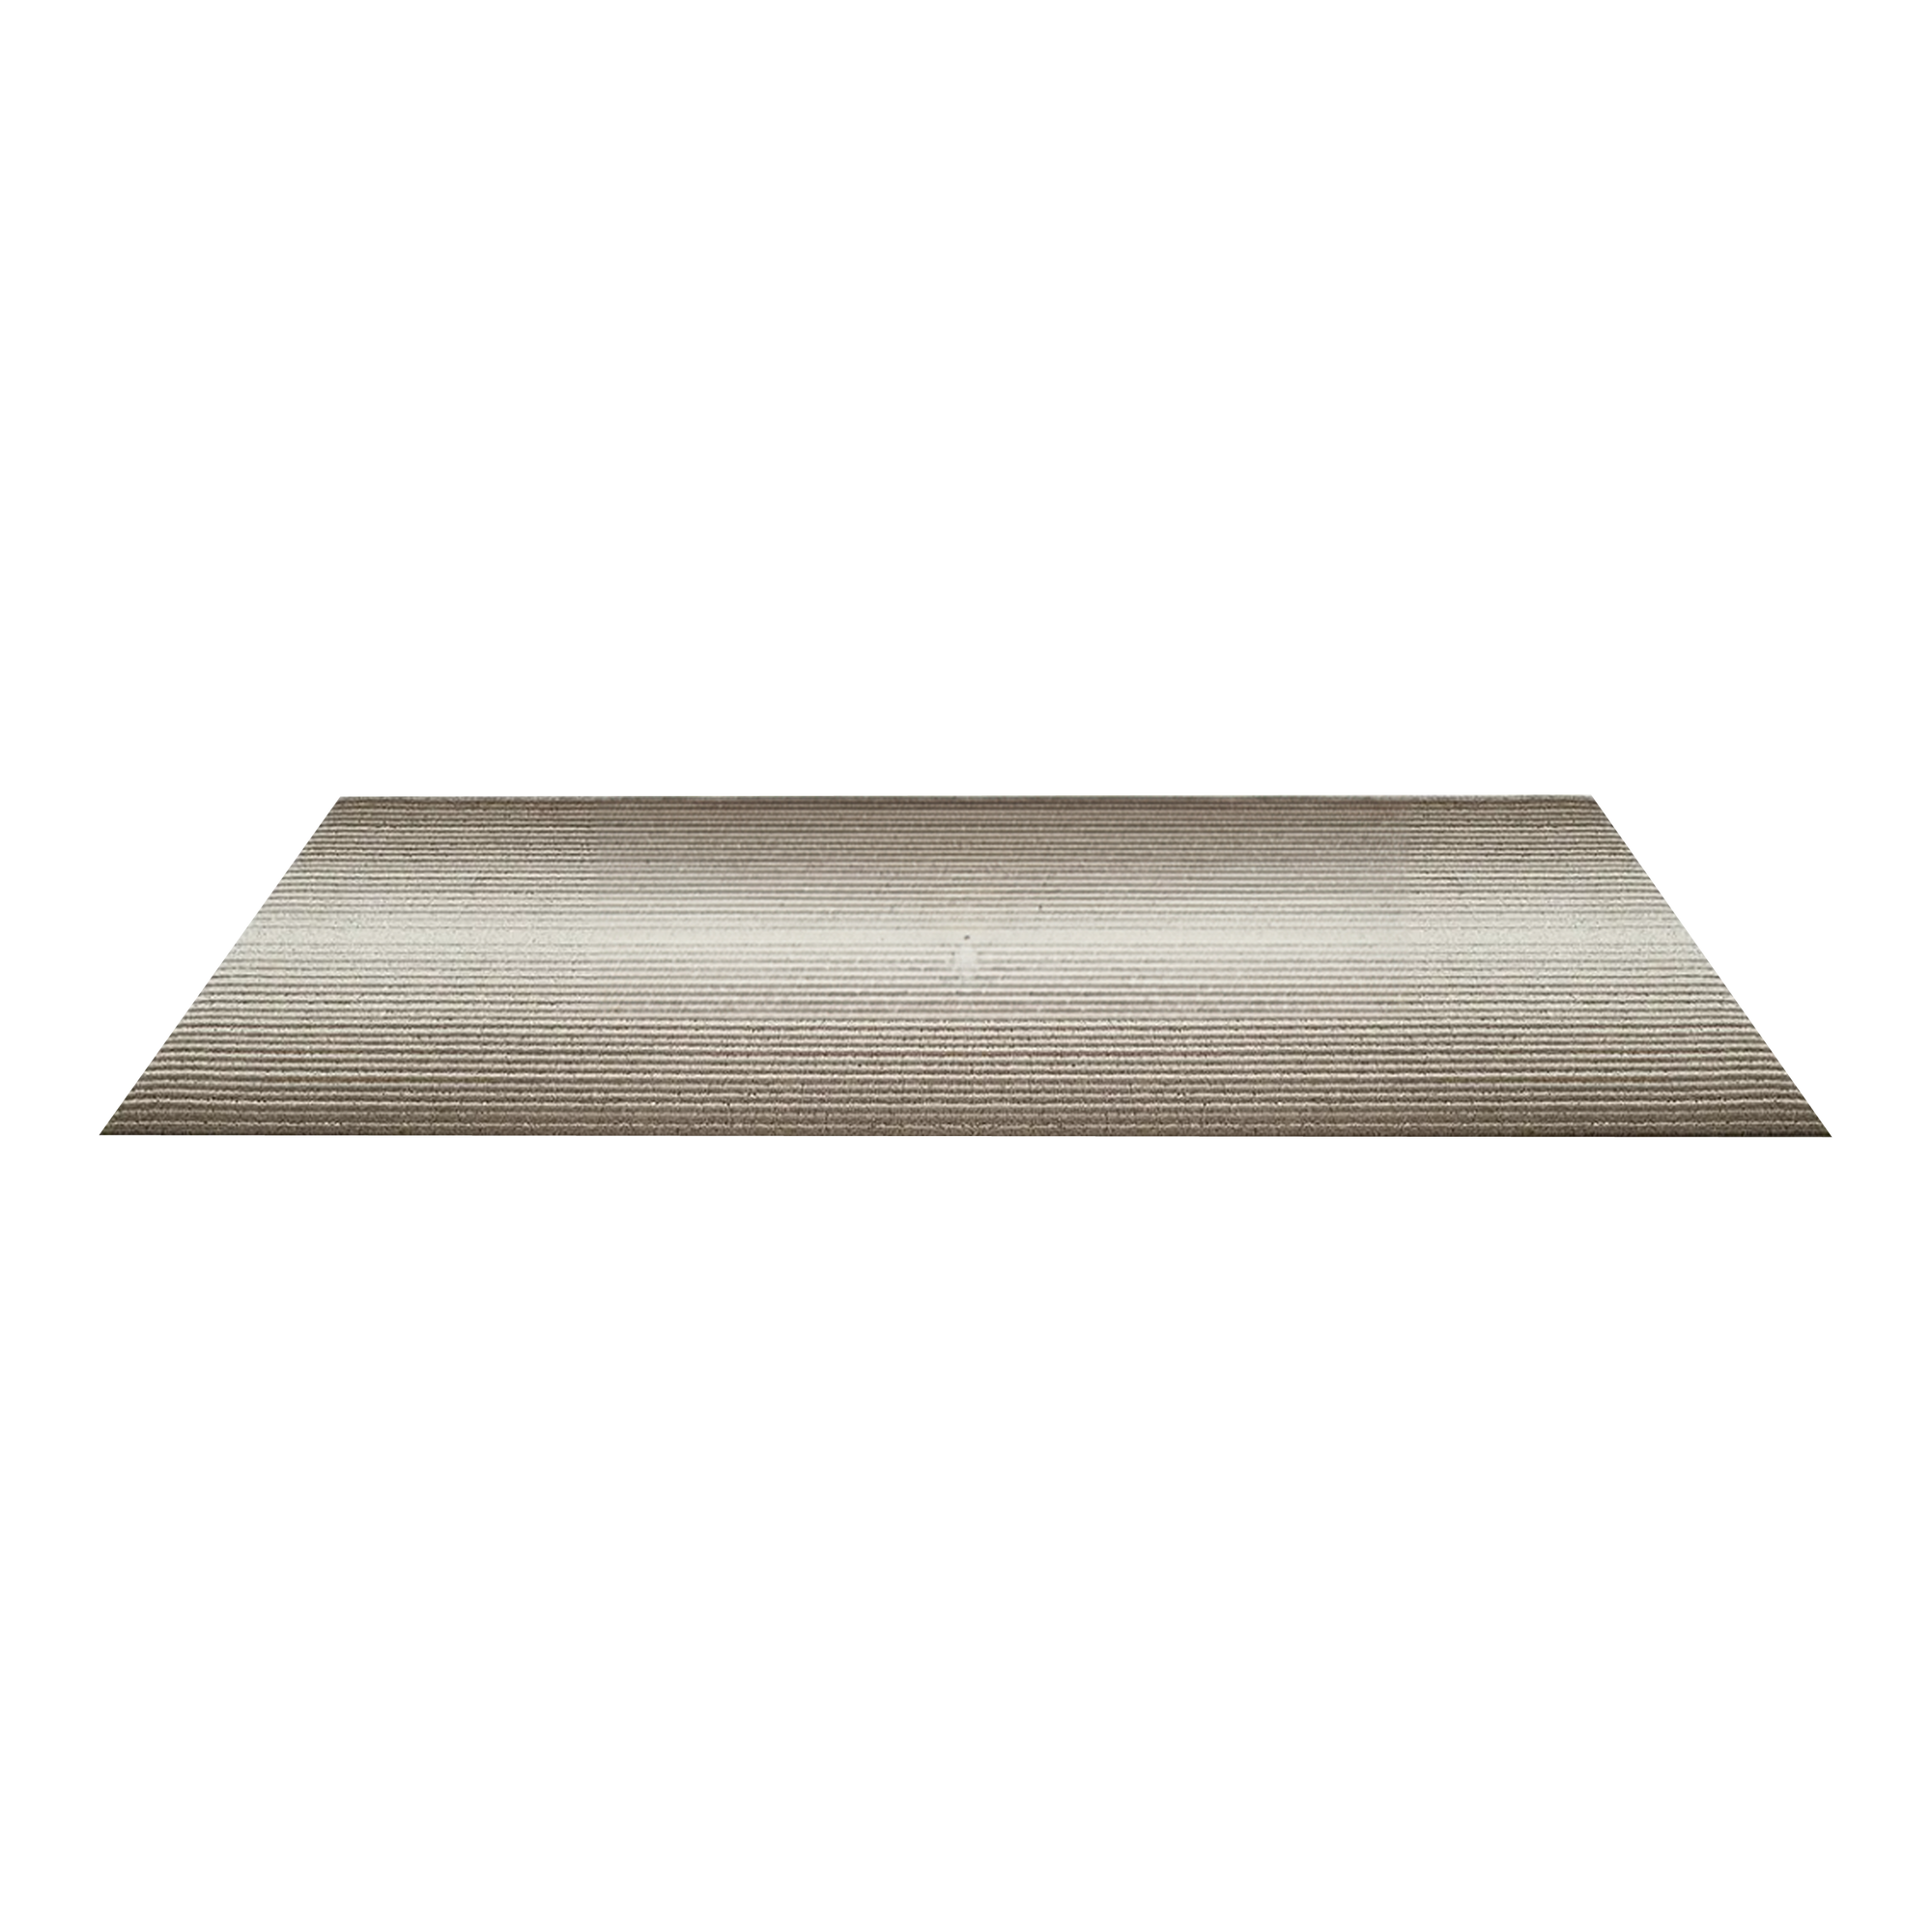 Inspired by the sharp contrast and mesmerizing motion of a cascading row of dominoes, the variegated stripes of this easy-care floor mat are at once dynamic and serene.